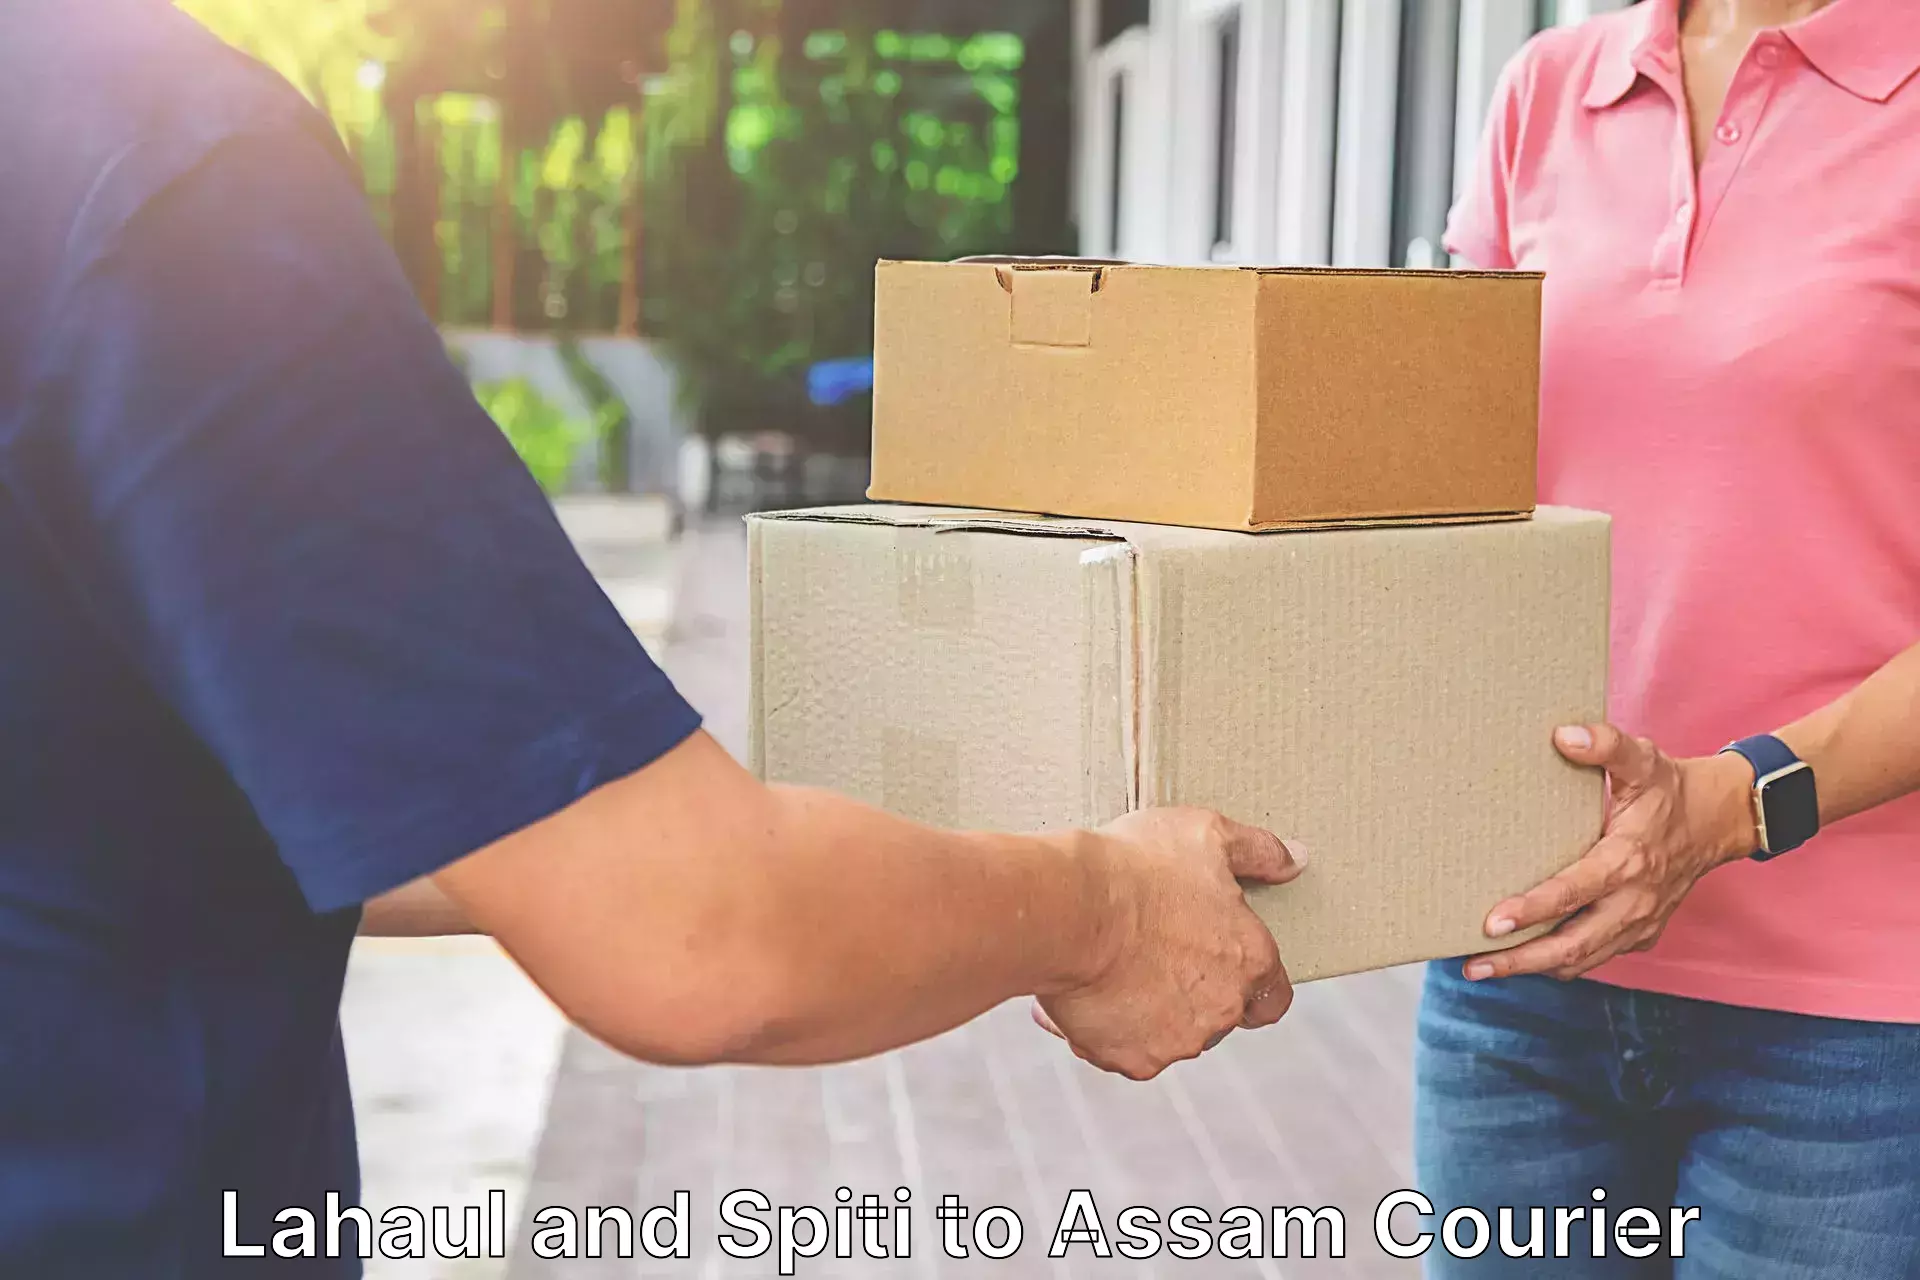 Subscription-based courier Lahaul and Spiti to Assam